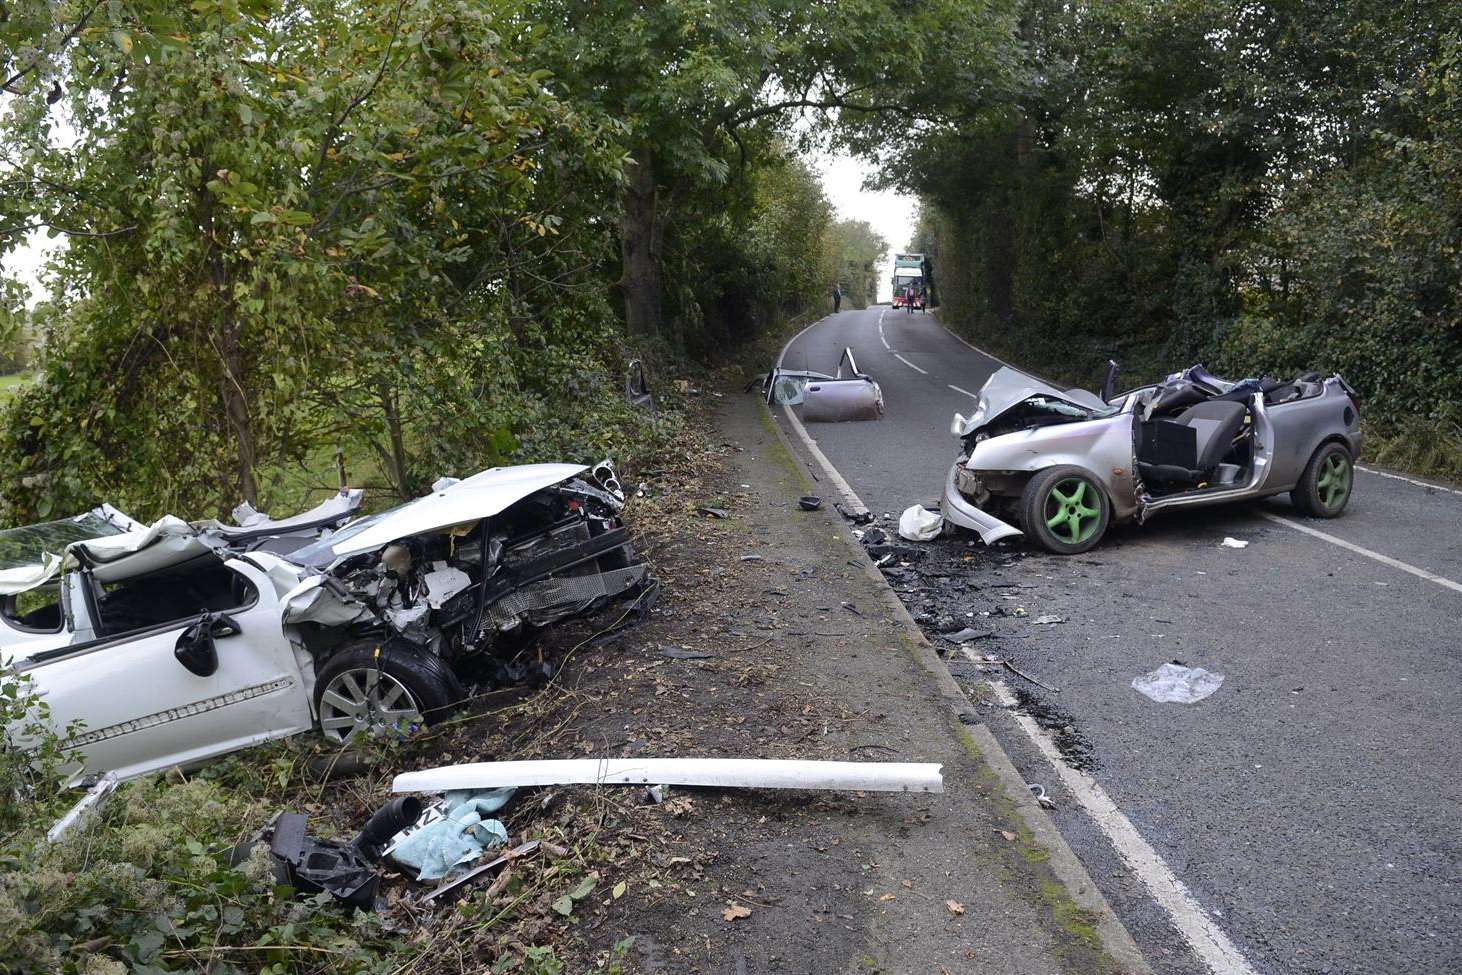 The scene of the accident at the A251 in Faversham